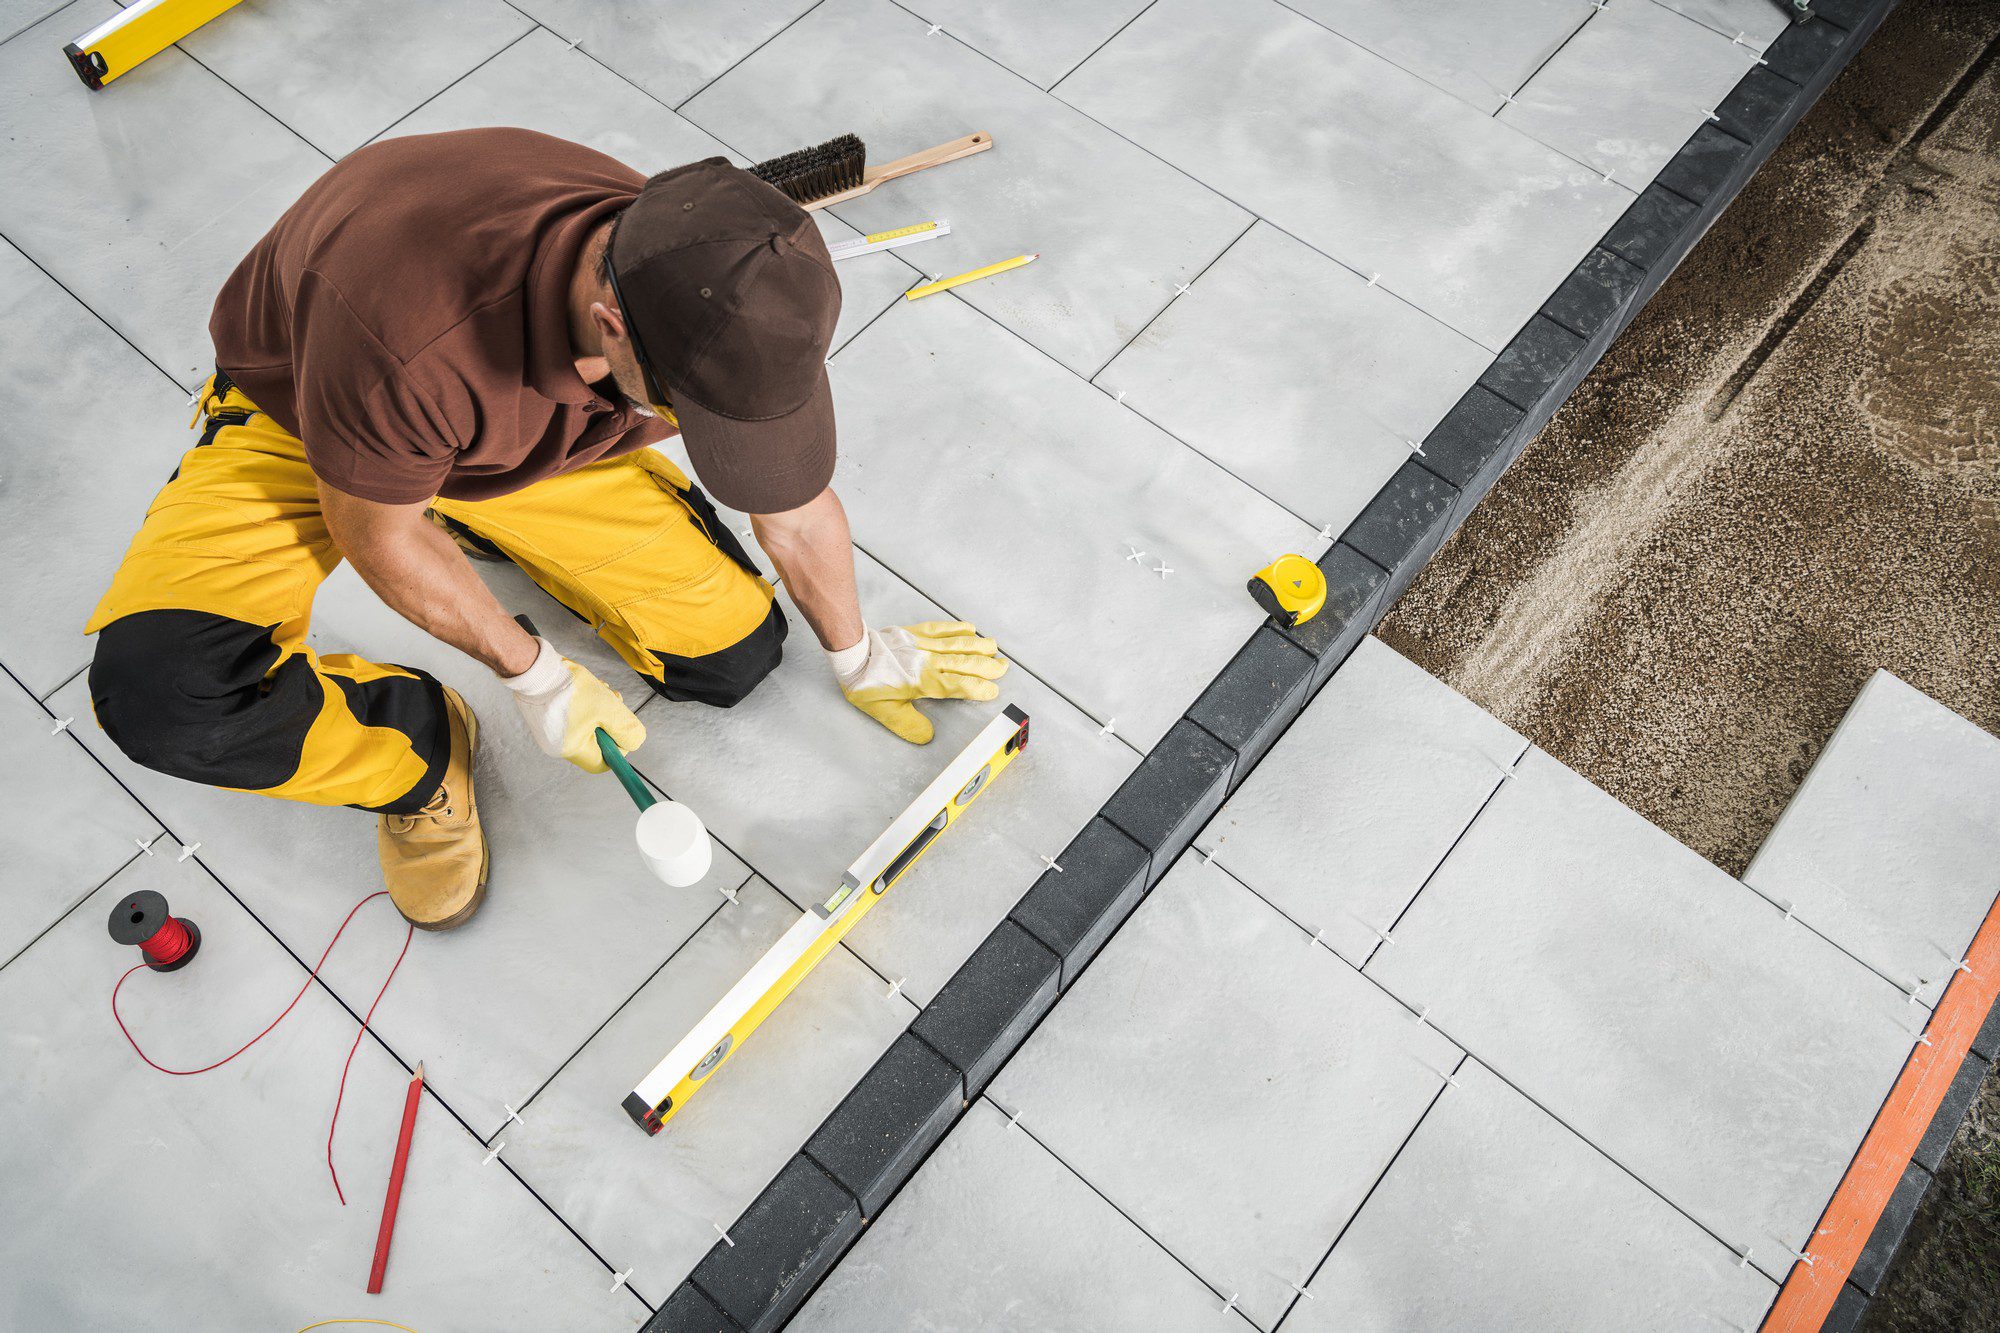 The image shows a person engaged in construction or handywork, specifically laying down tiles. The person is wearing a brown cap, a brown t-shirt, yellow work pants, and work boots, and has on safety gloves. There are several tools and materials in the vicinity, including a rubber mallet, a spirit level, a measuring tape, and tile spacers. The person appears to be securing a tile into place or checking its level on a surface that is partly tiled with what appears to be a gray outdoor or heavy-duty tile. To the right side, there is an area that has not yet been tiled, revealing the raw subfloor, which looks like compacted gravel or a prepared base layer for tiling. There is an element of precision at work here, as indicated by the spirit level and the careful positioning of the tiles.